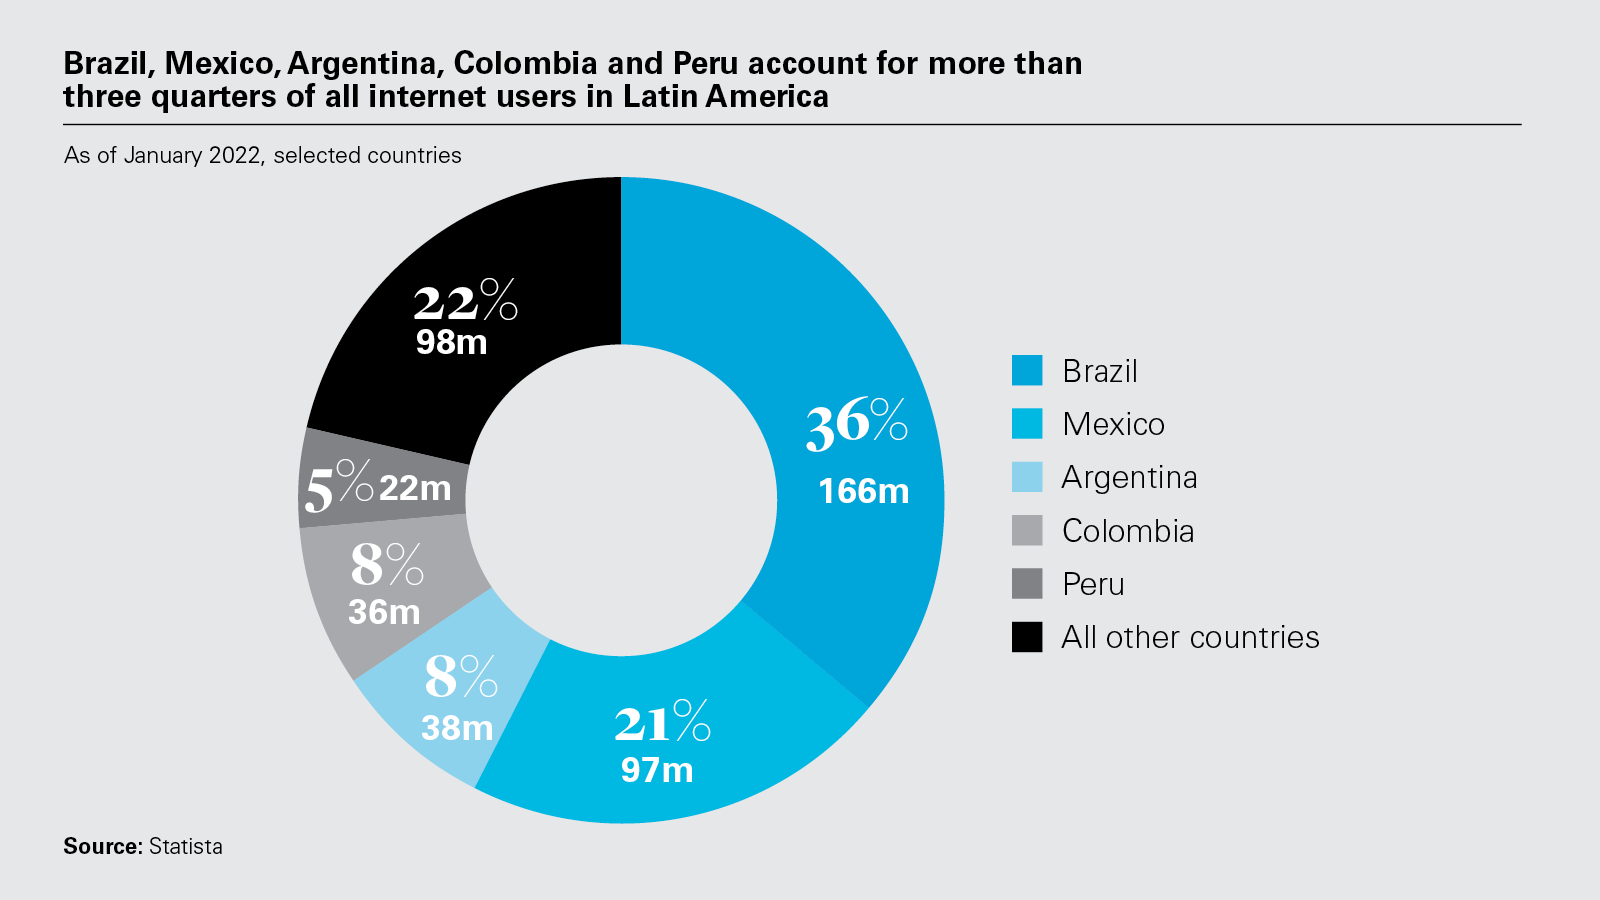 Brazil, Mexico, Argentina, Colombia and Peru account for more than three quarters of all internet users in Latin America